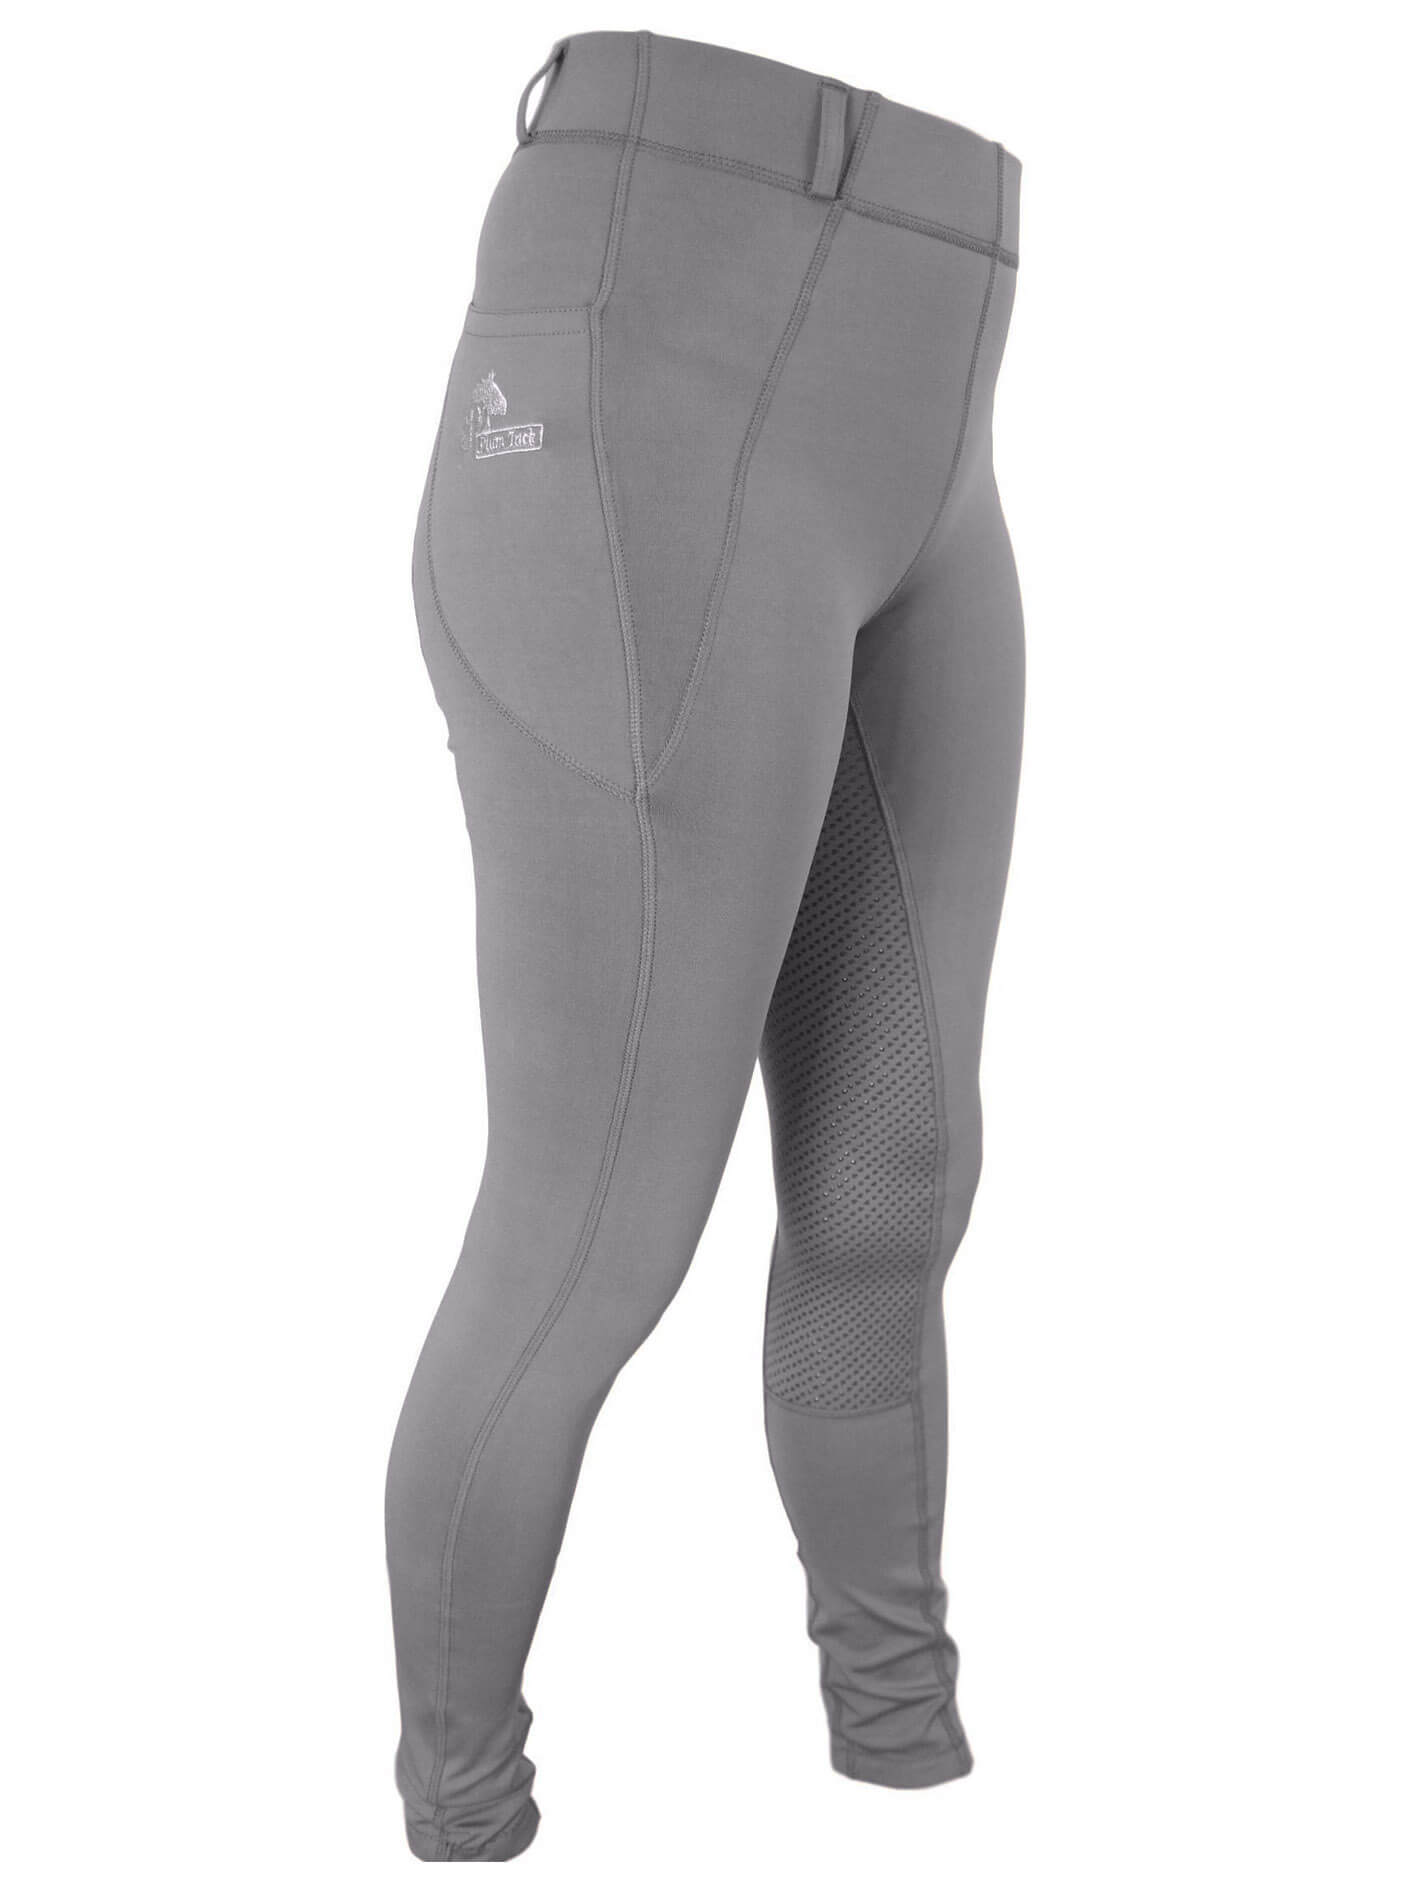 Woman modeling gray Horse Riding Tights with mesh panel details.